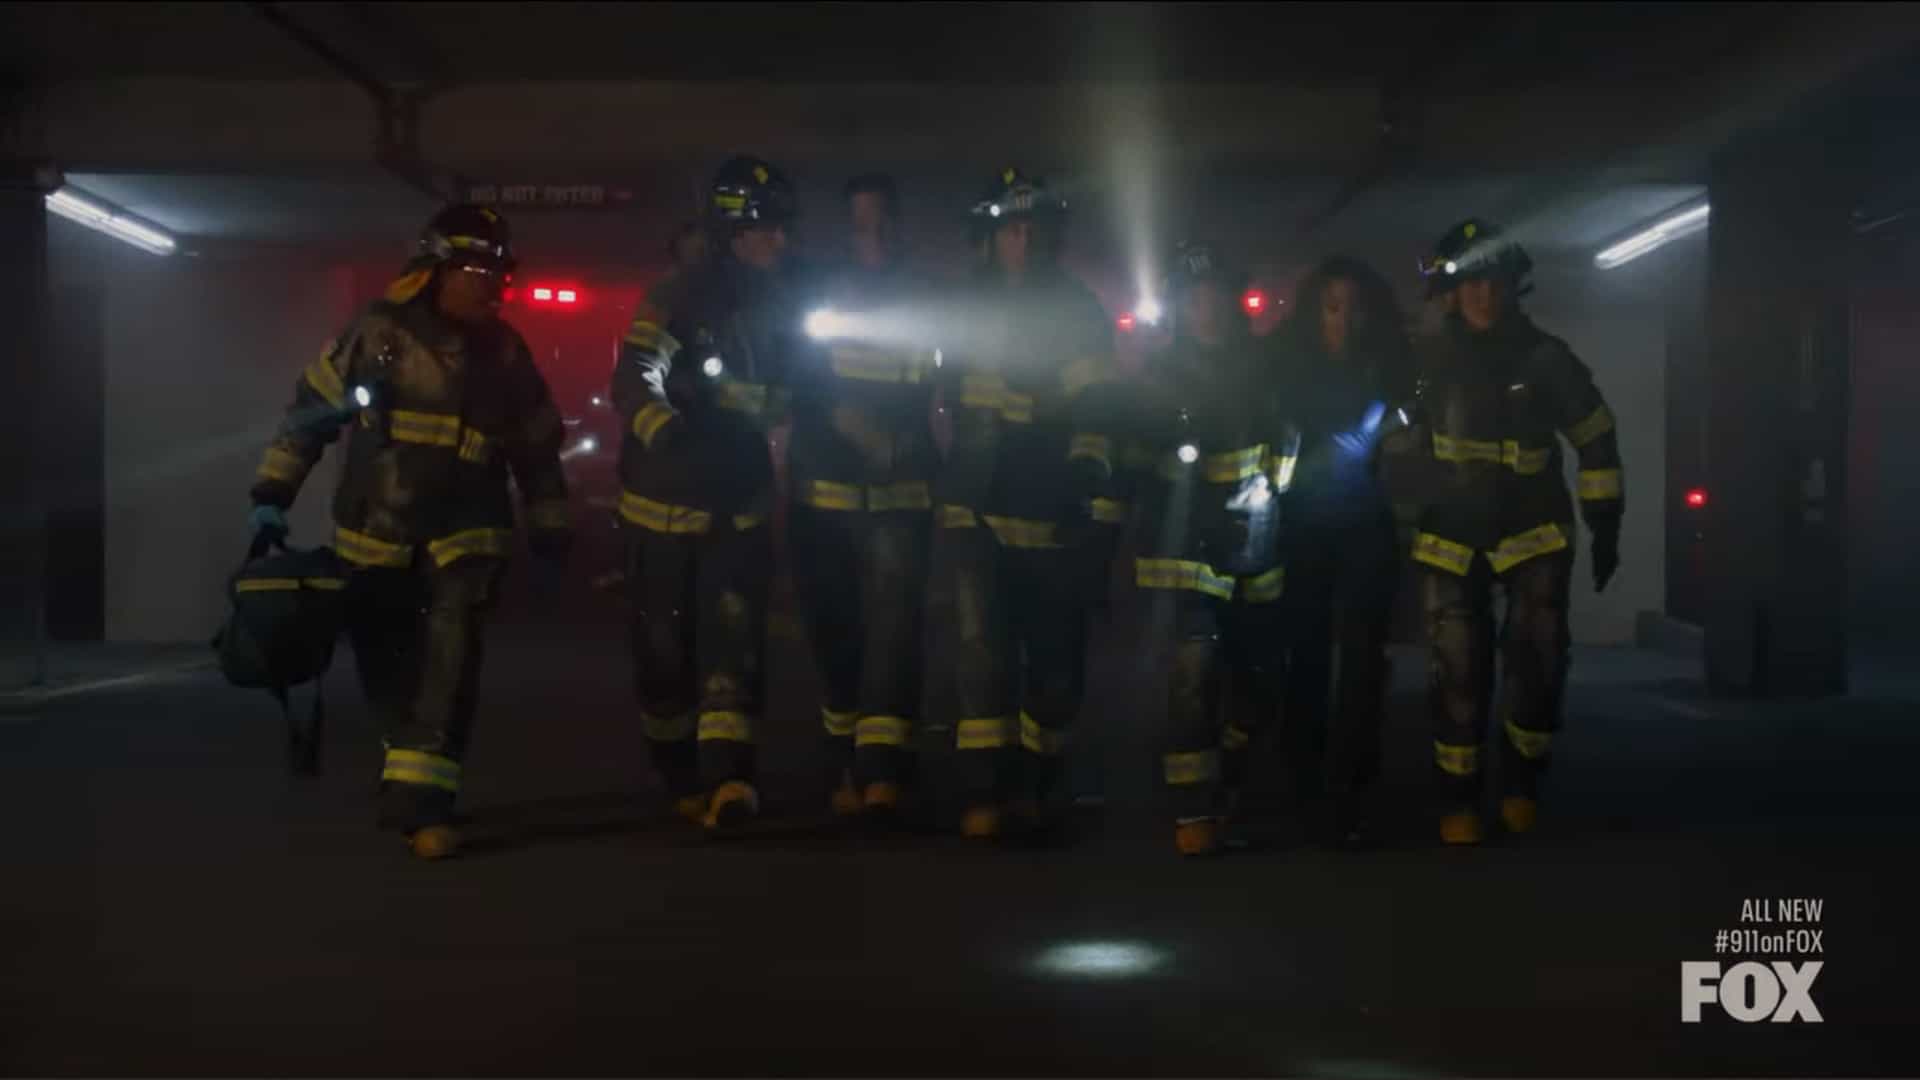 The 118 walking away from the dispatch building